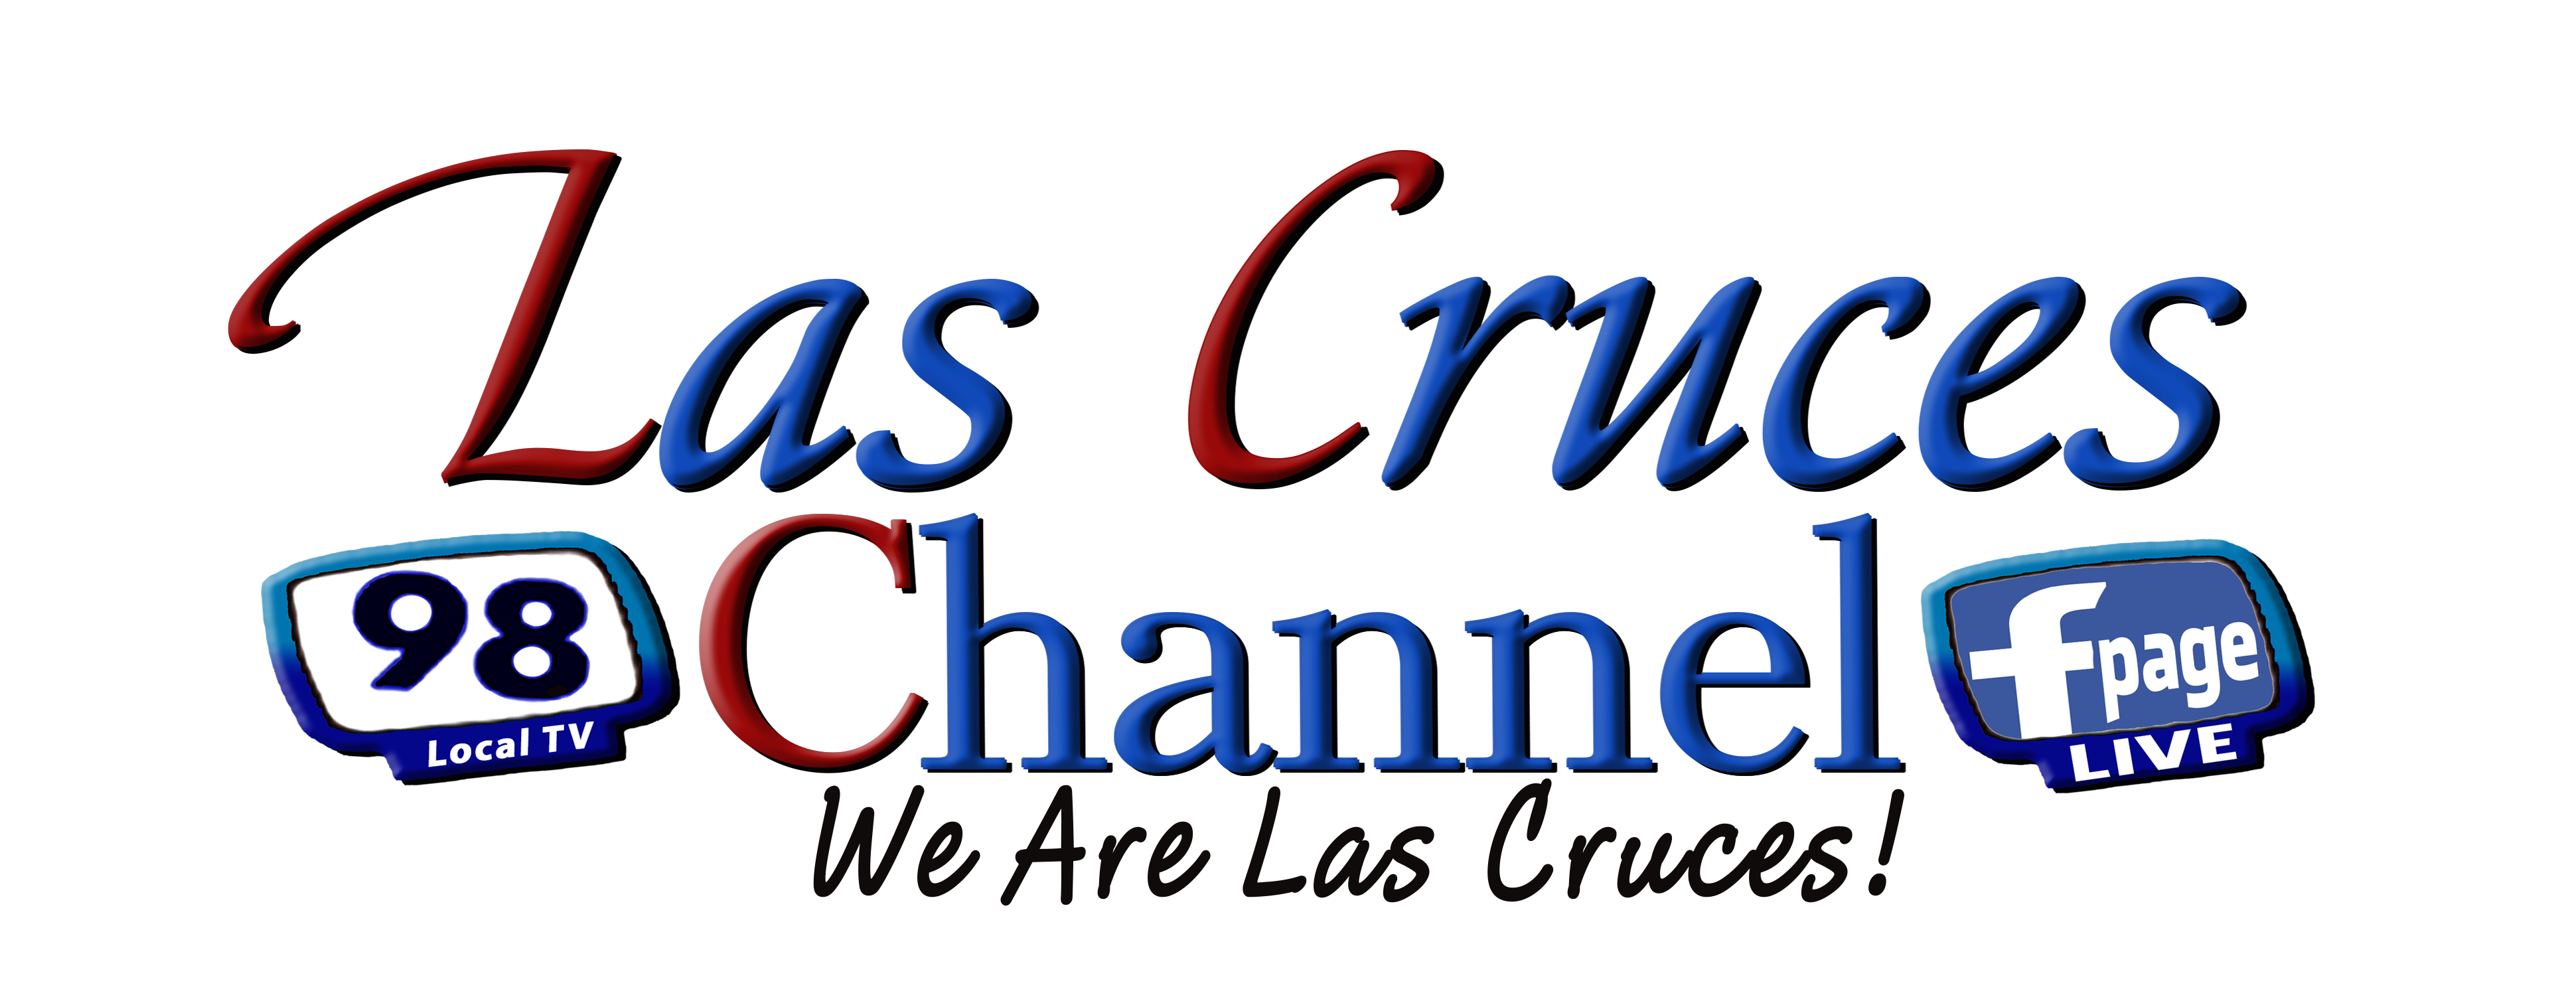 Las Cruces Channel